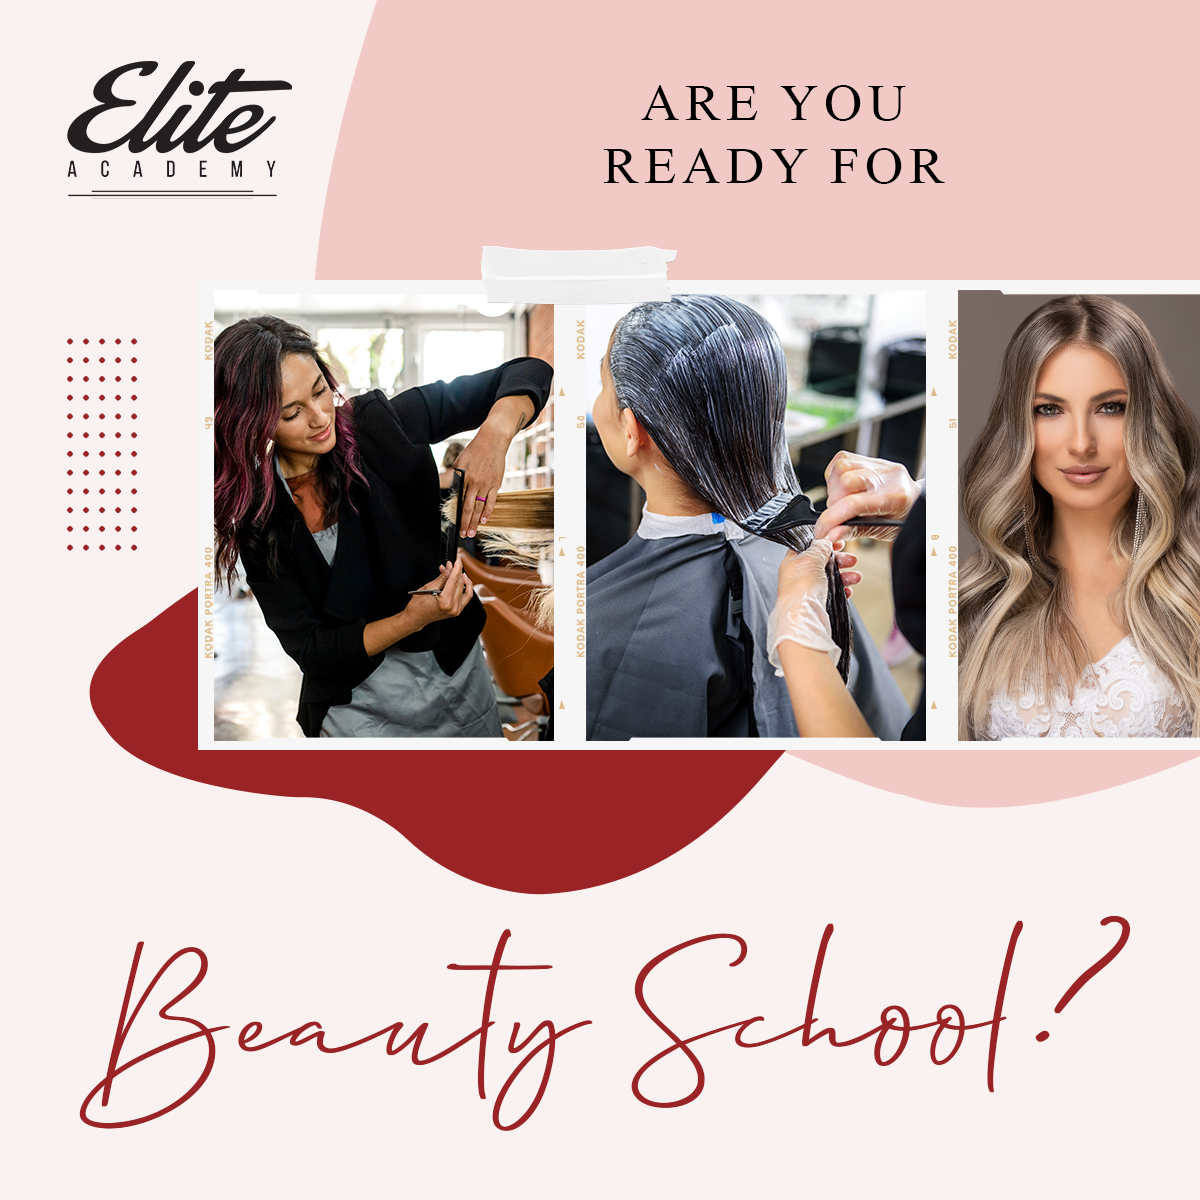 Are You Ready for Beauty School?